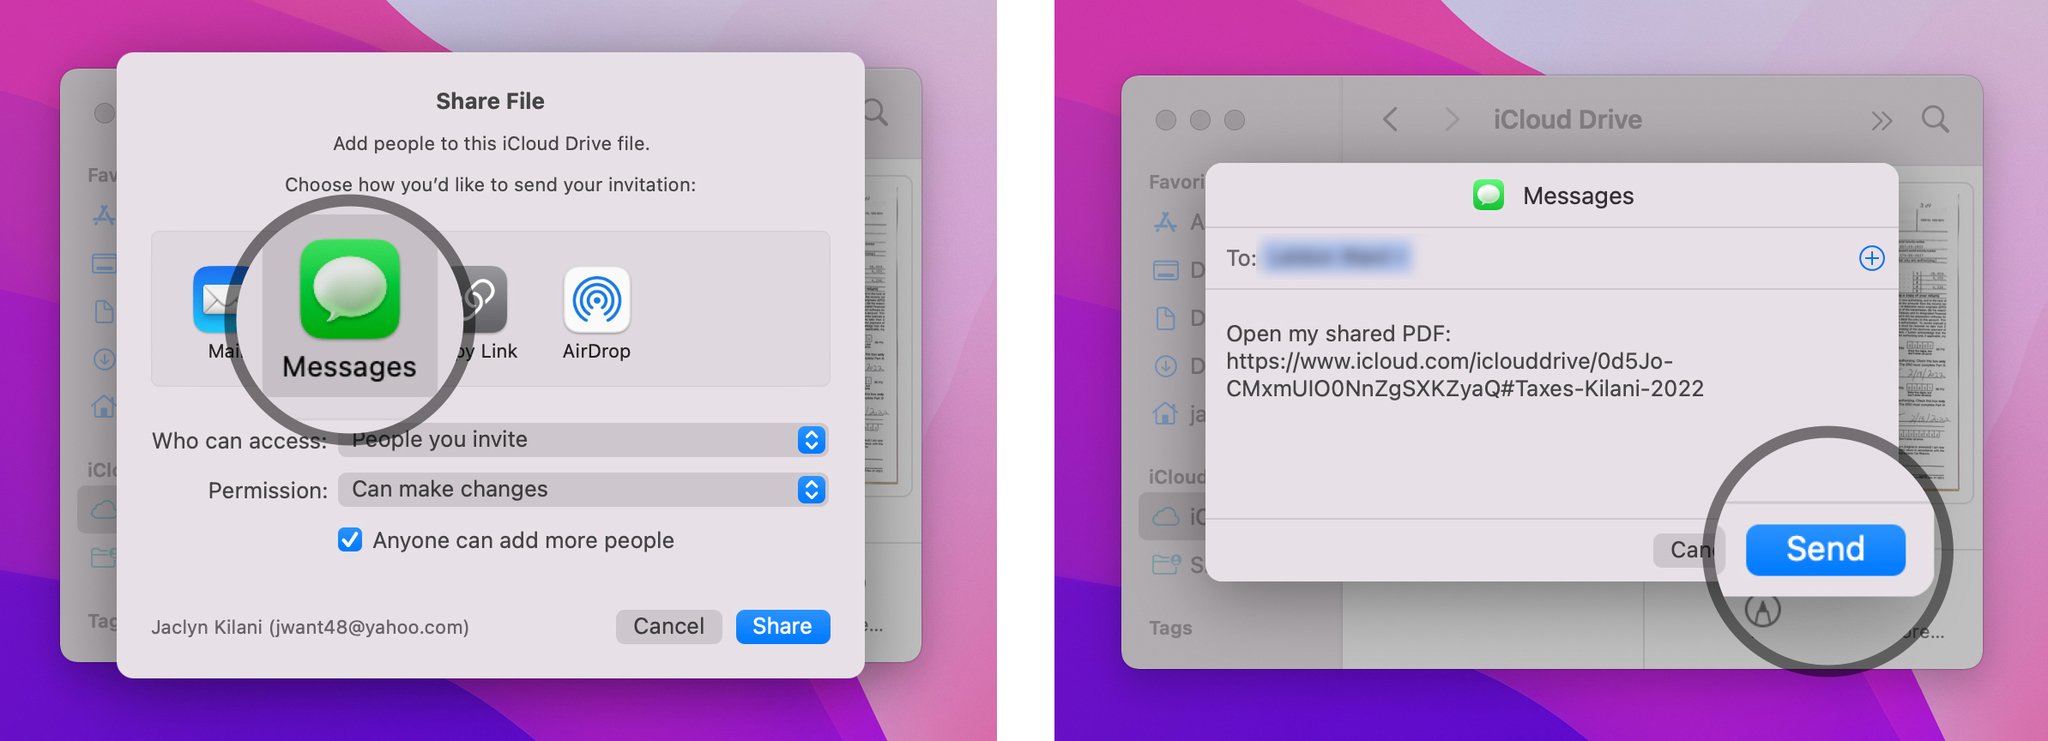 Share a document: Select a method, then send the invite